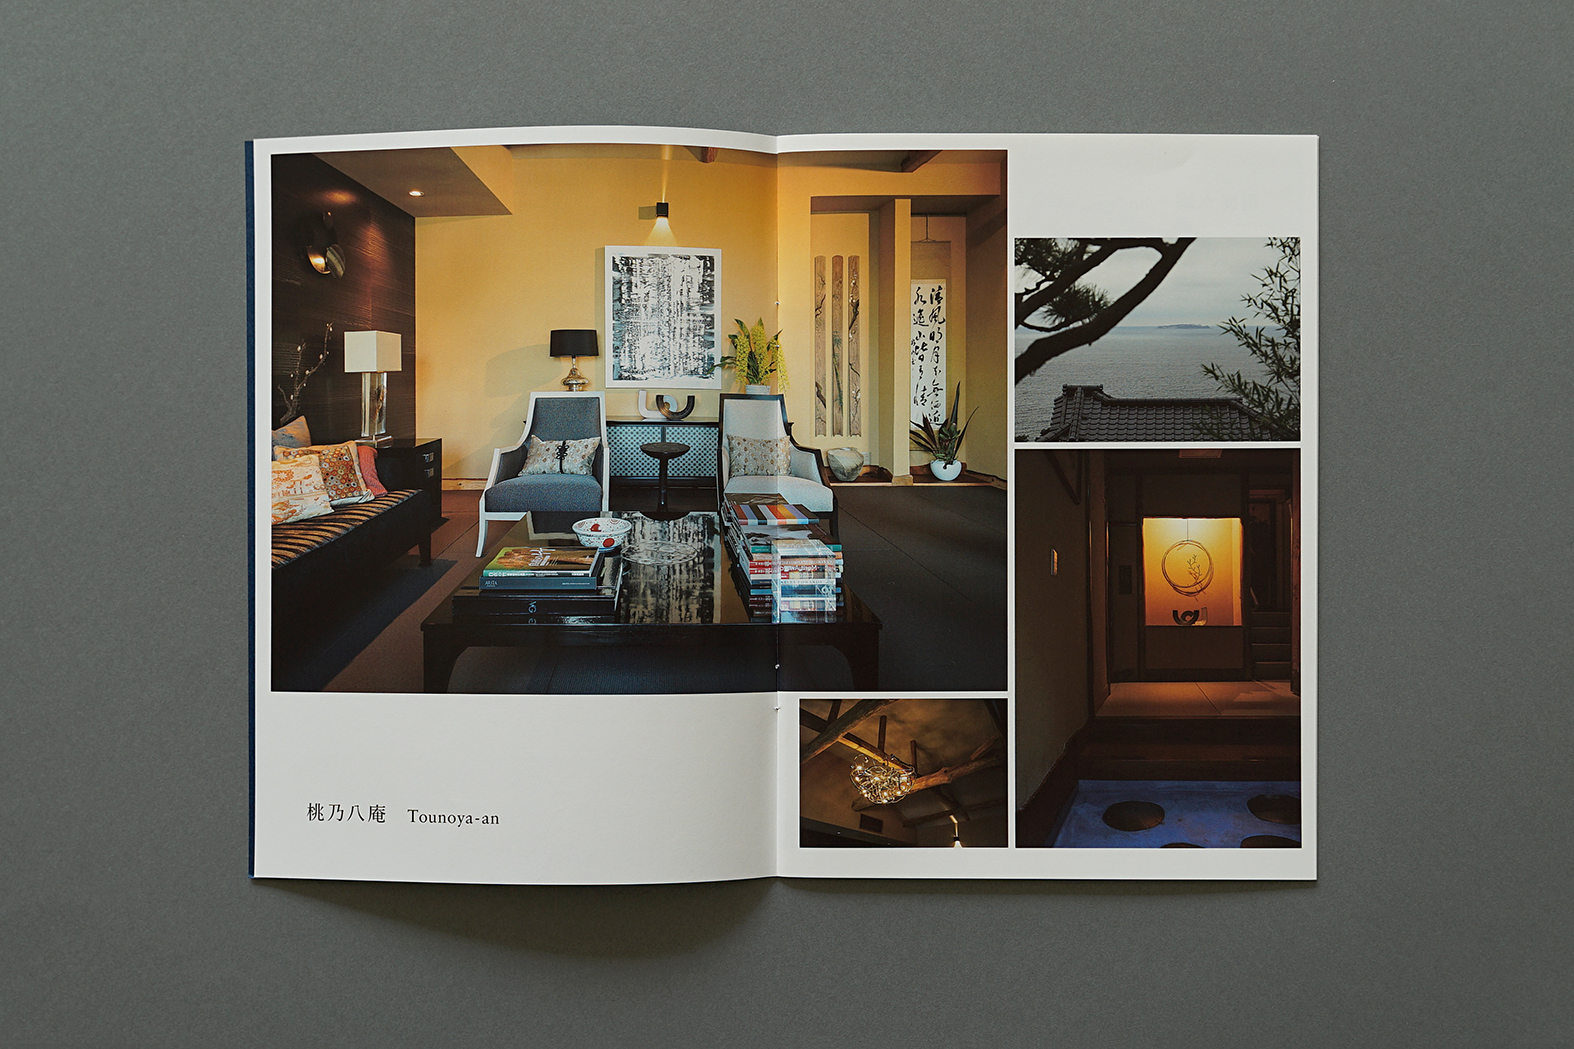 works_curation_hotel_atami